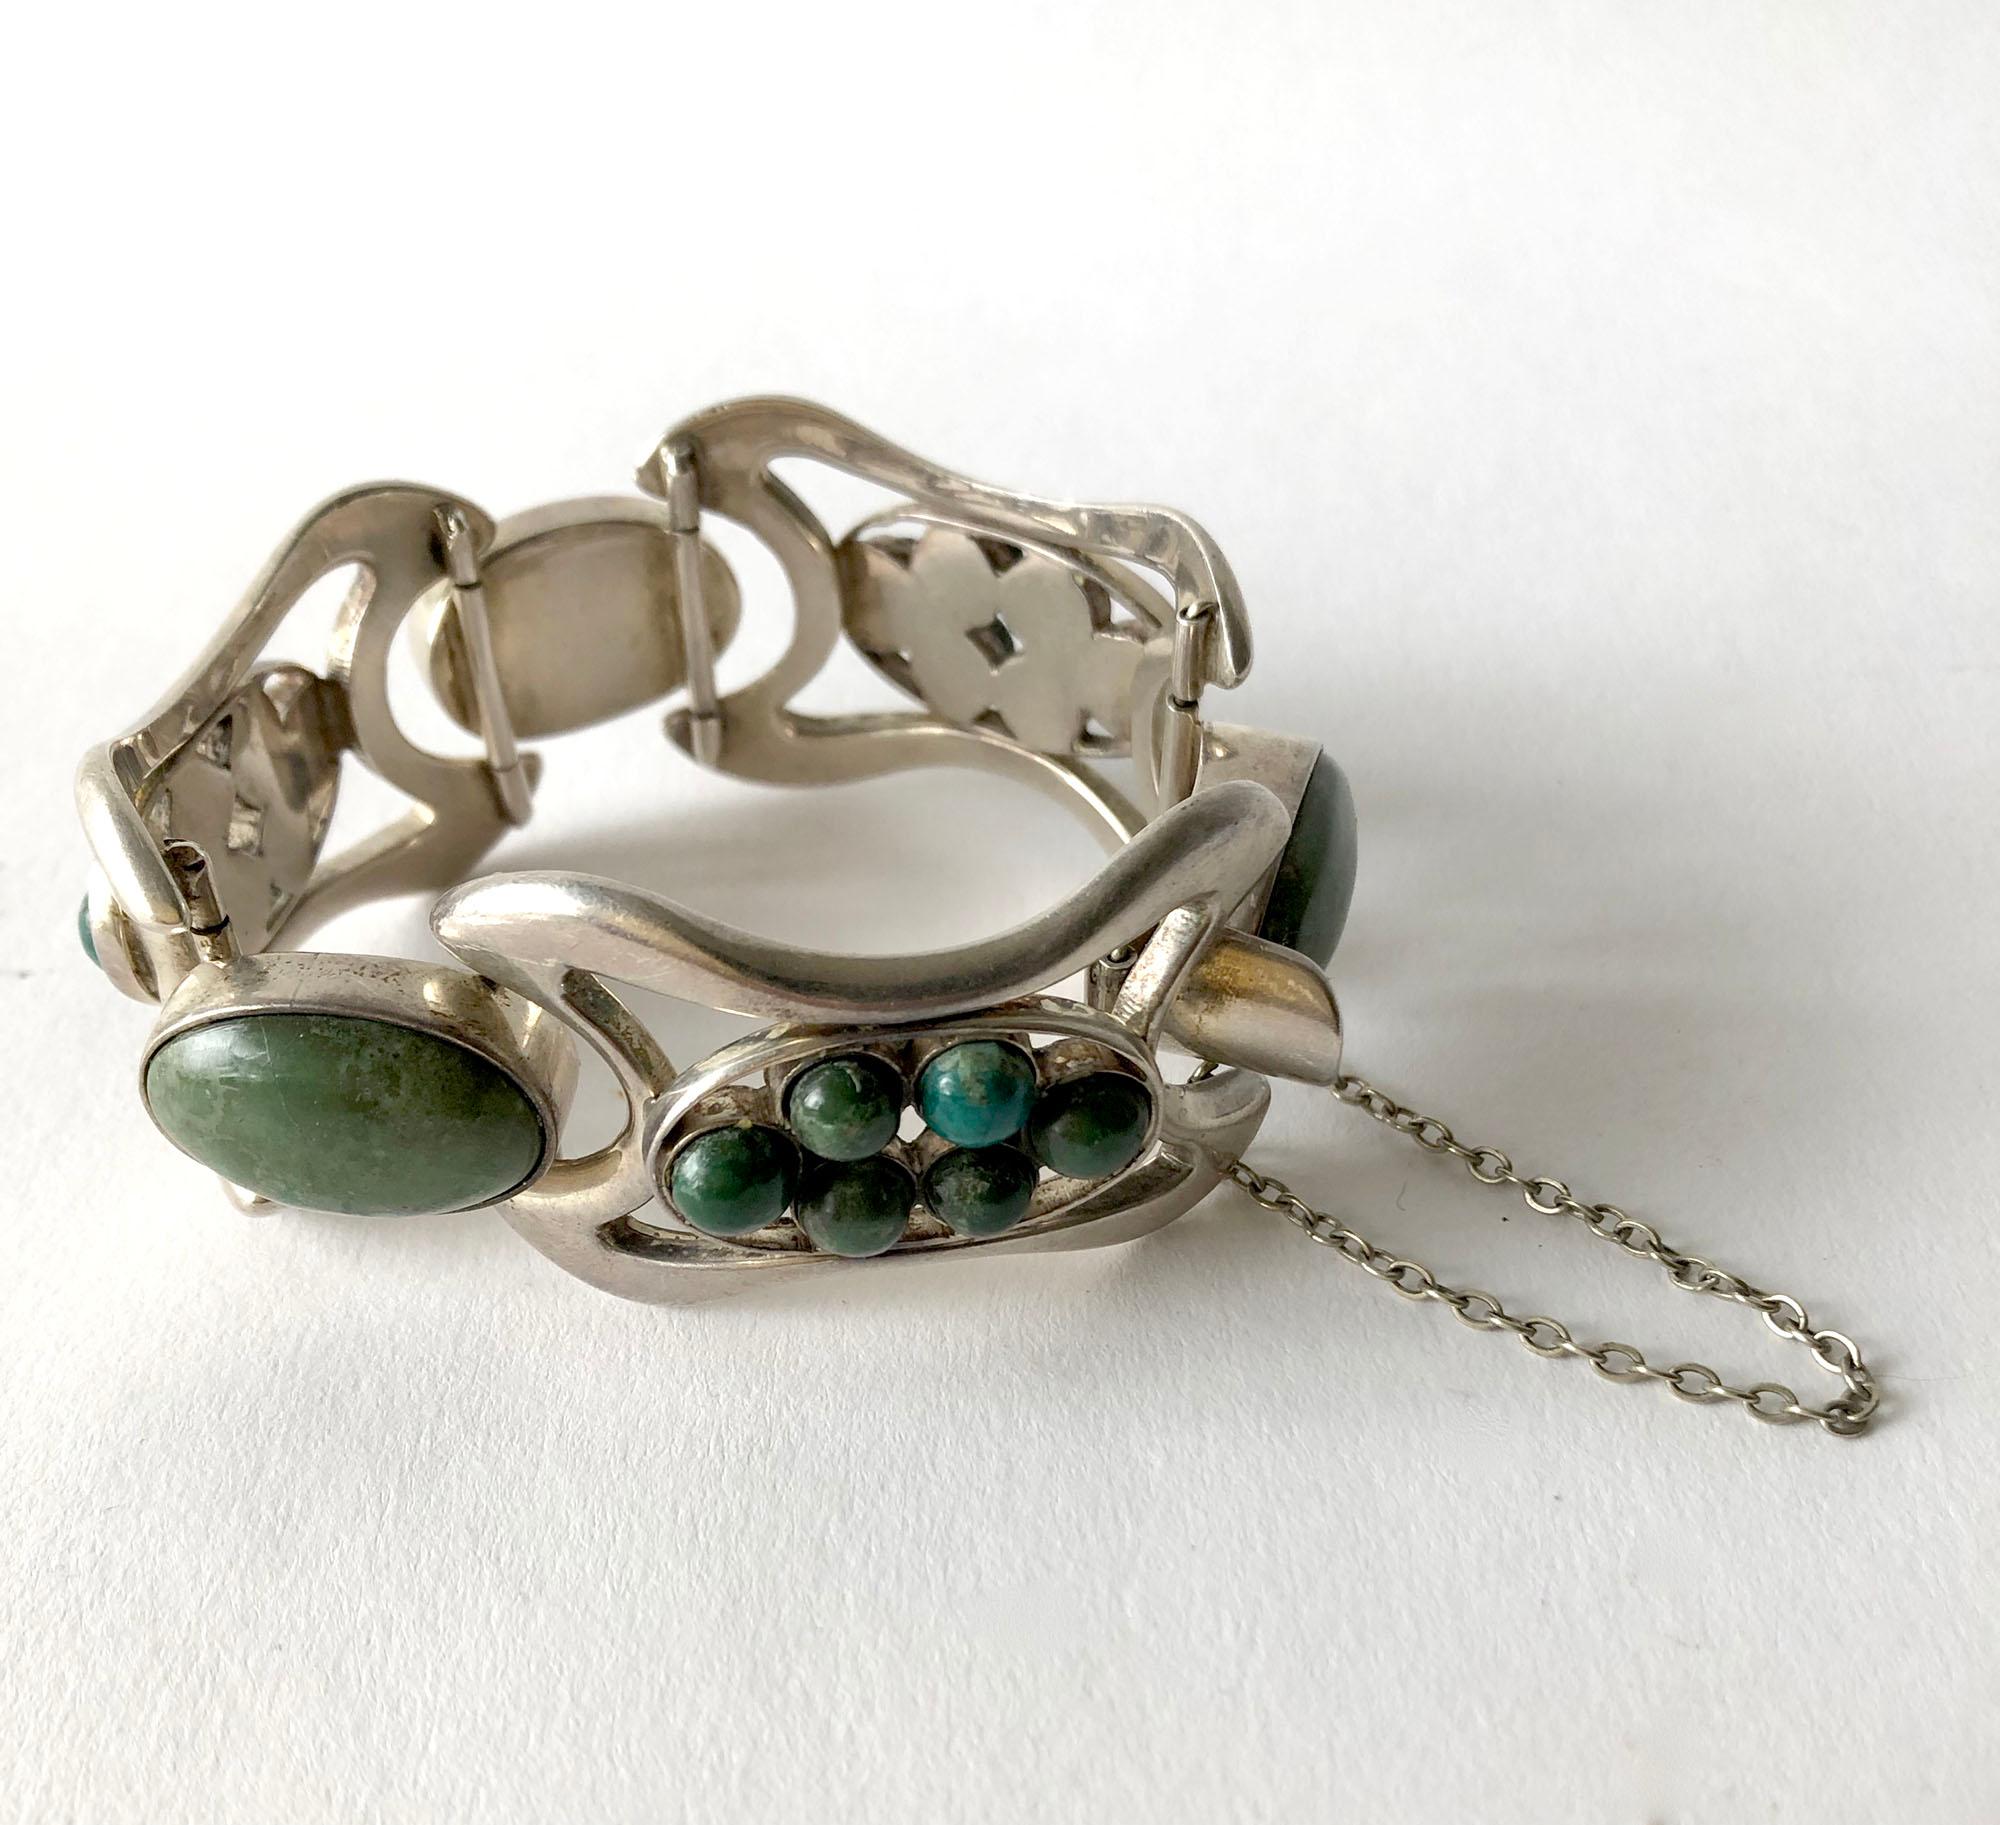 Mexican modernist sterling silver bracelet with Mexican jade cabochons created by Erika Hult de Corral of Puerto Vallarta, Mexico. Bracelet measures 1.25